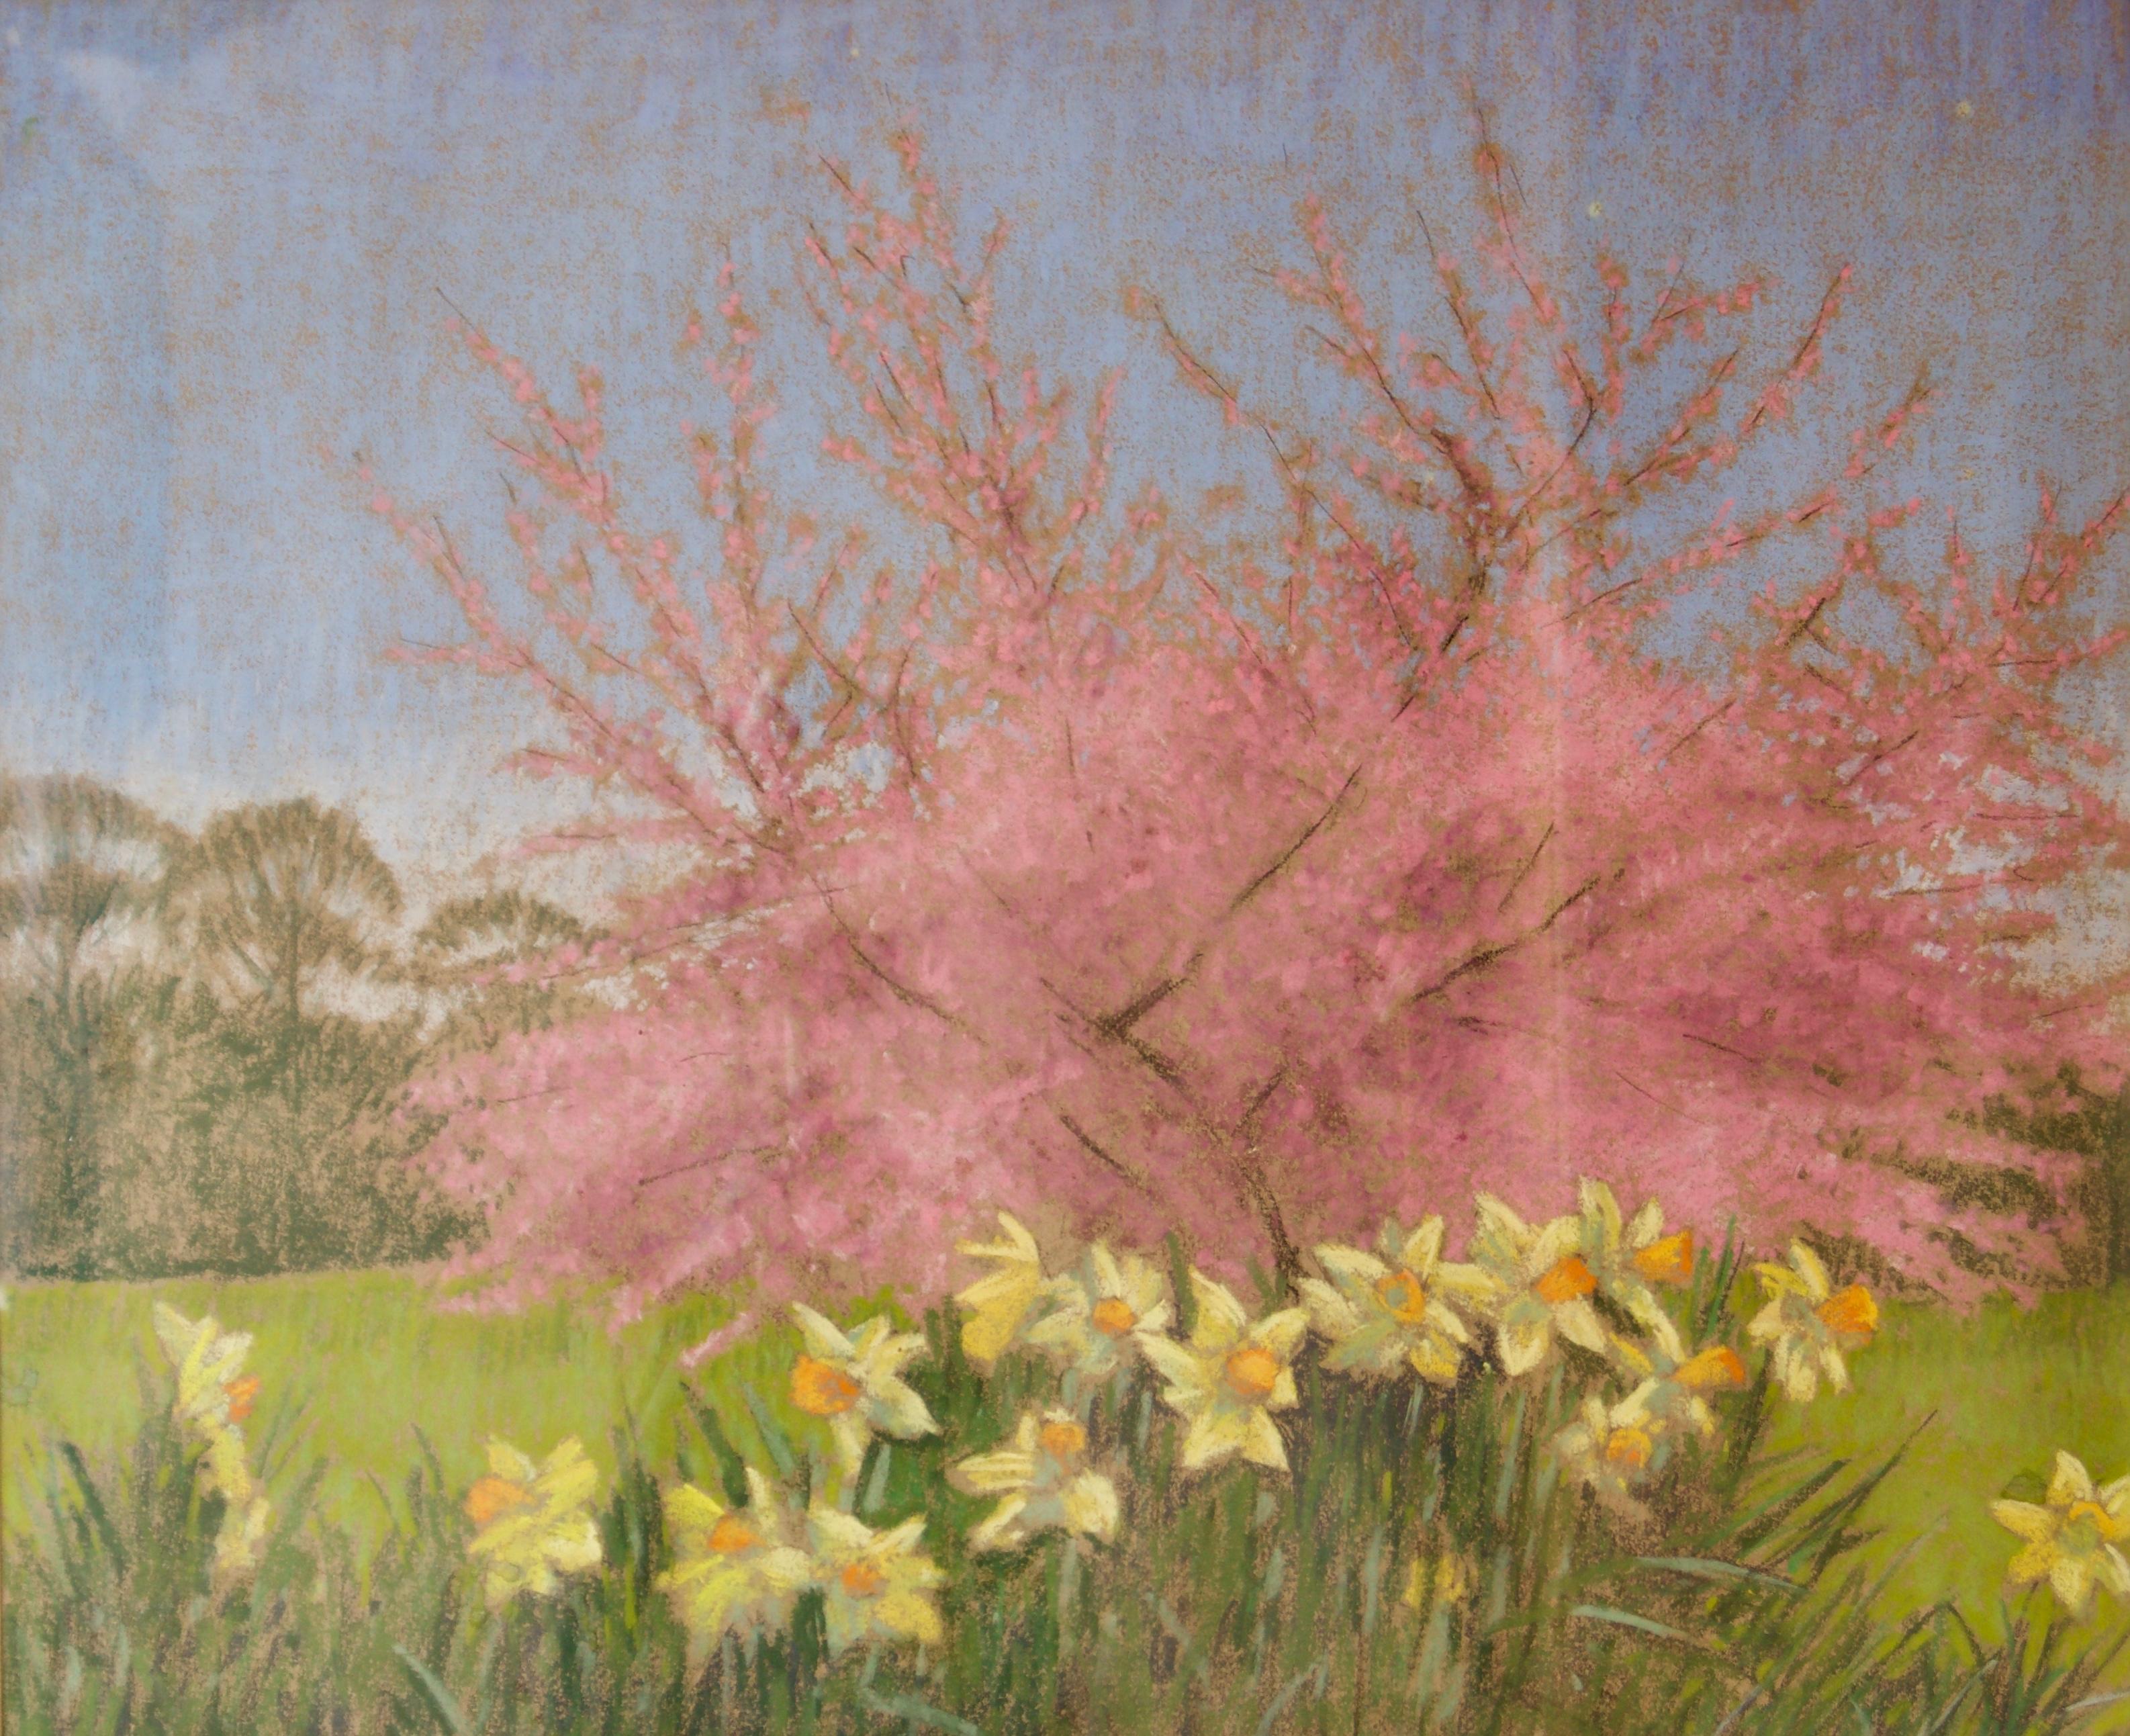 Apple Blossom Tree and Dandelions - Mid 20th Century Impressionist Landscape Oil